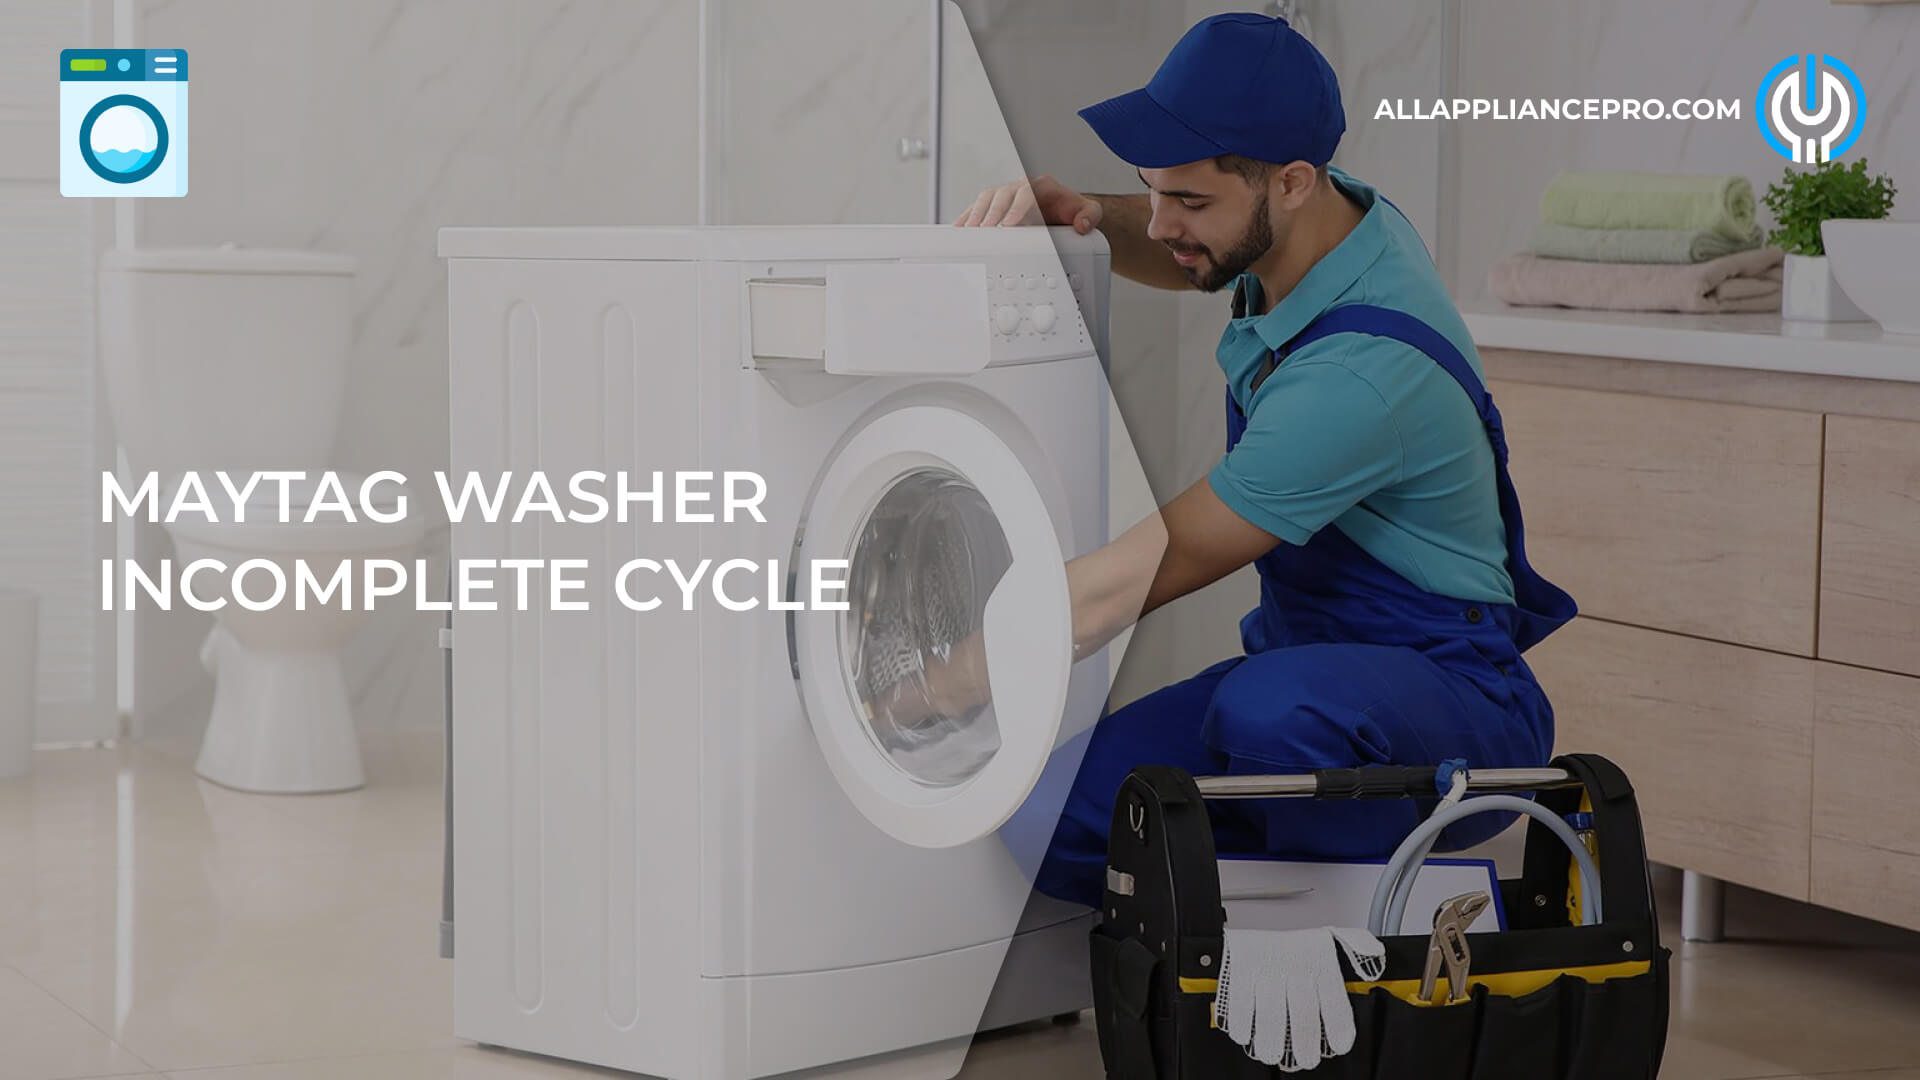 Maytag Washer Incomplete Cycle